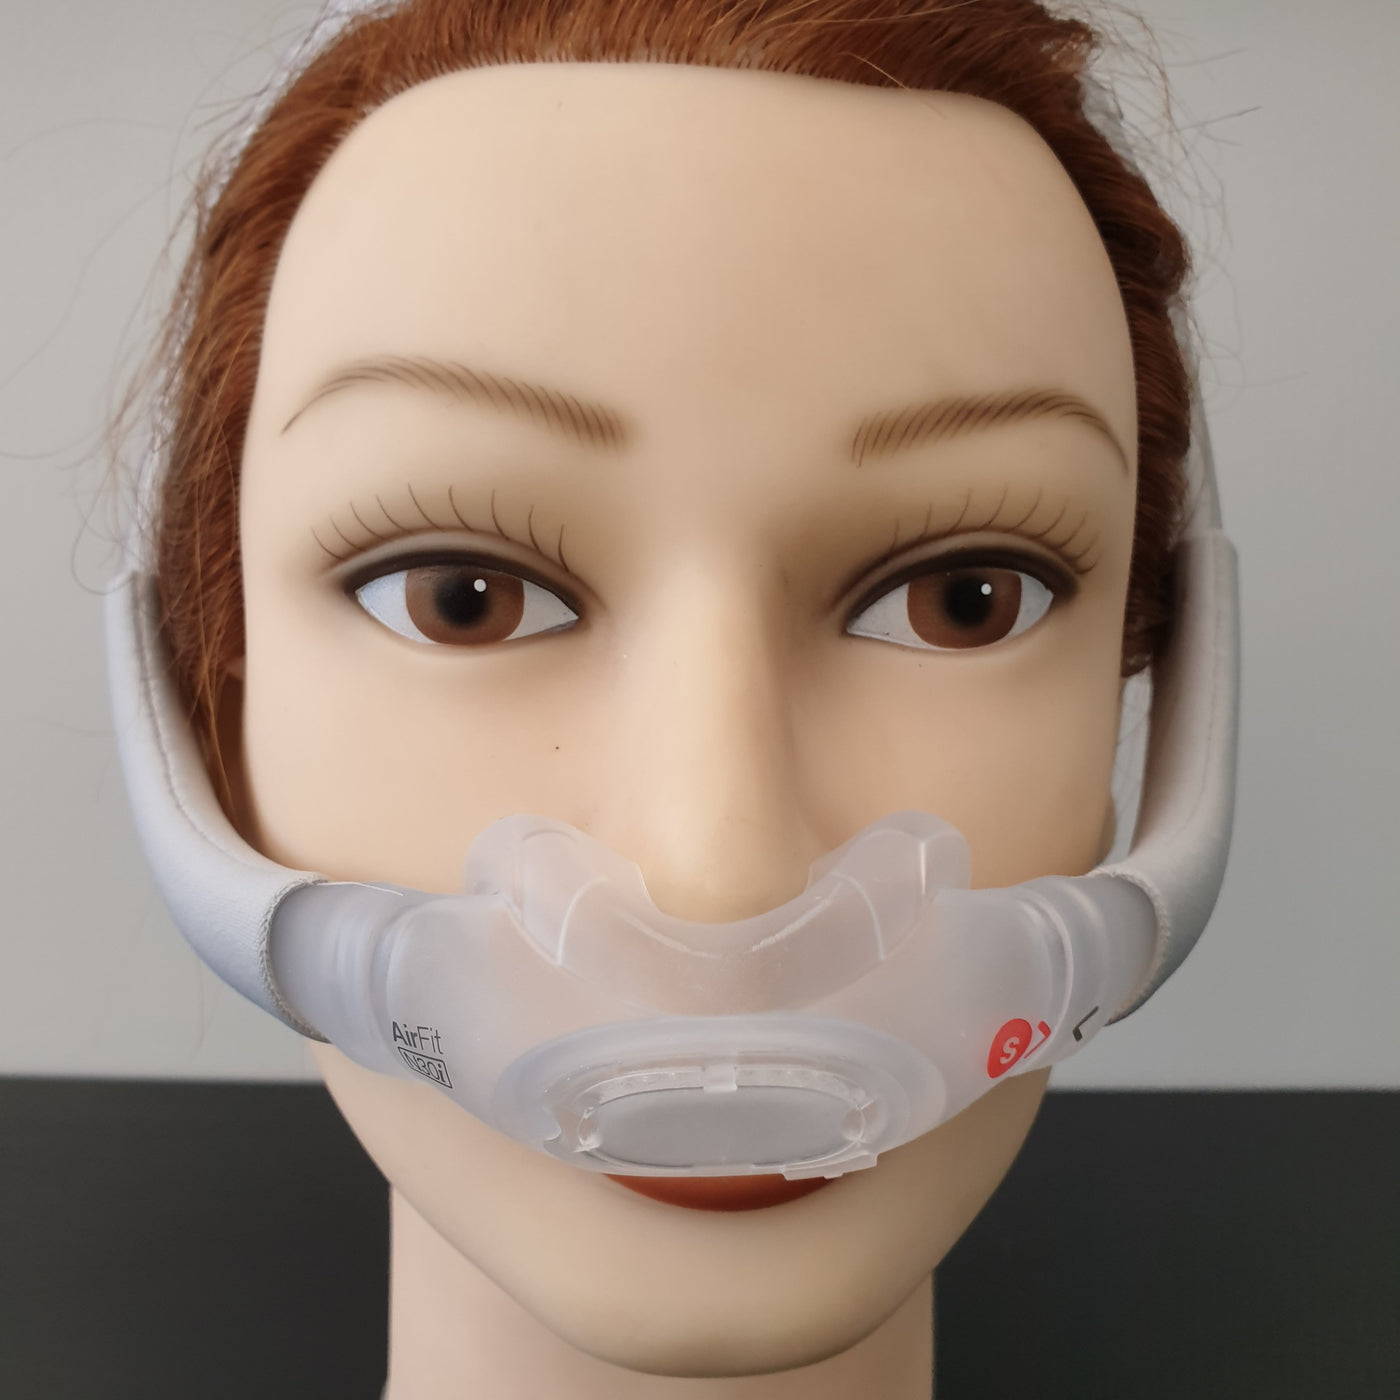 New ResMed AirFit N30i nasal mask Quiet Air vent starter pack in size Small / Std CPAP